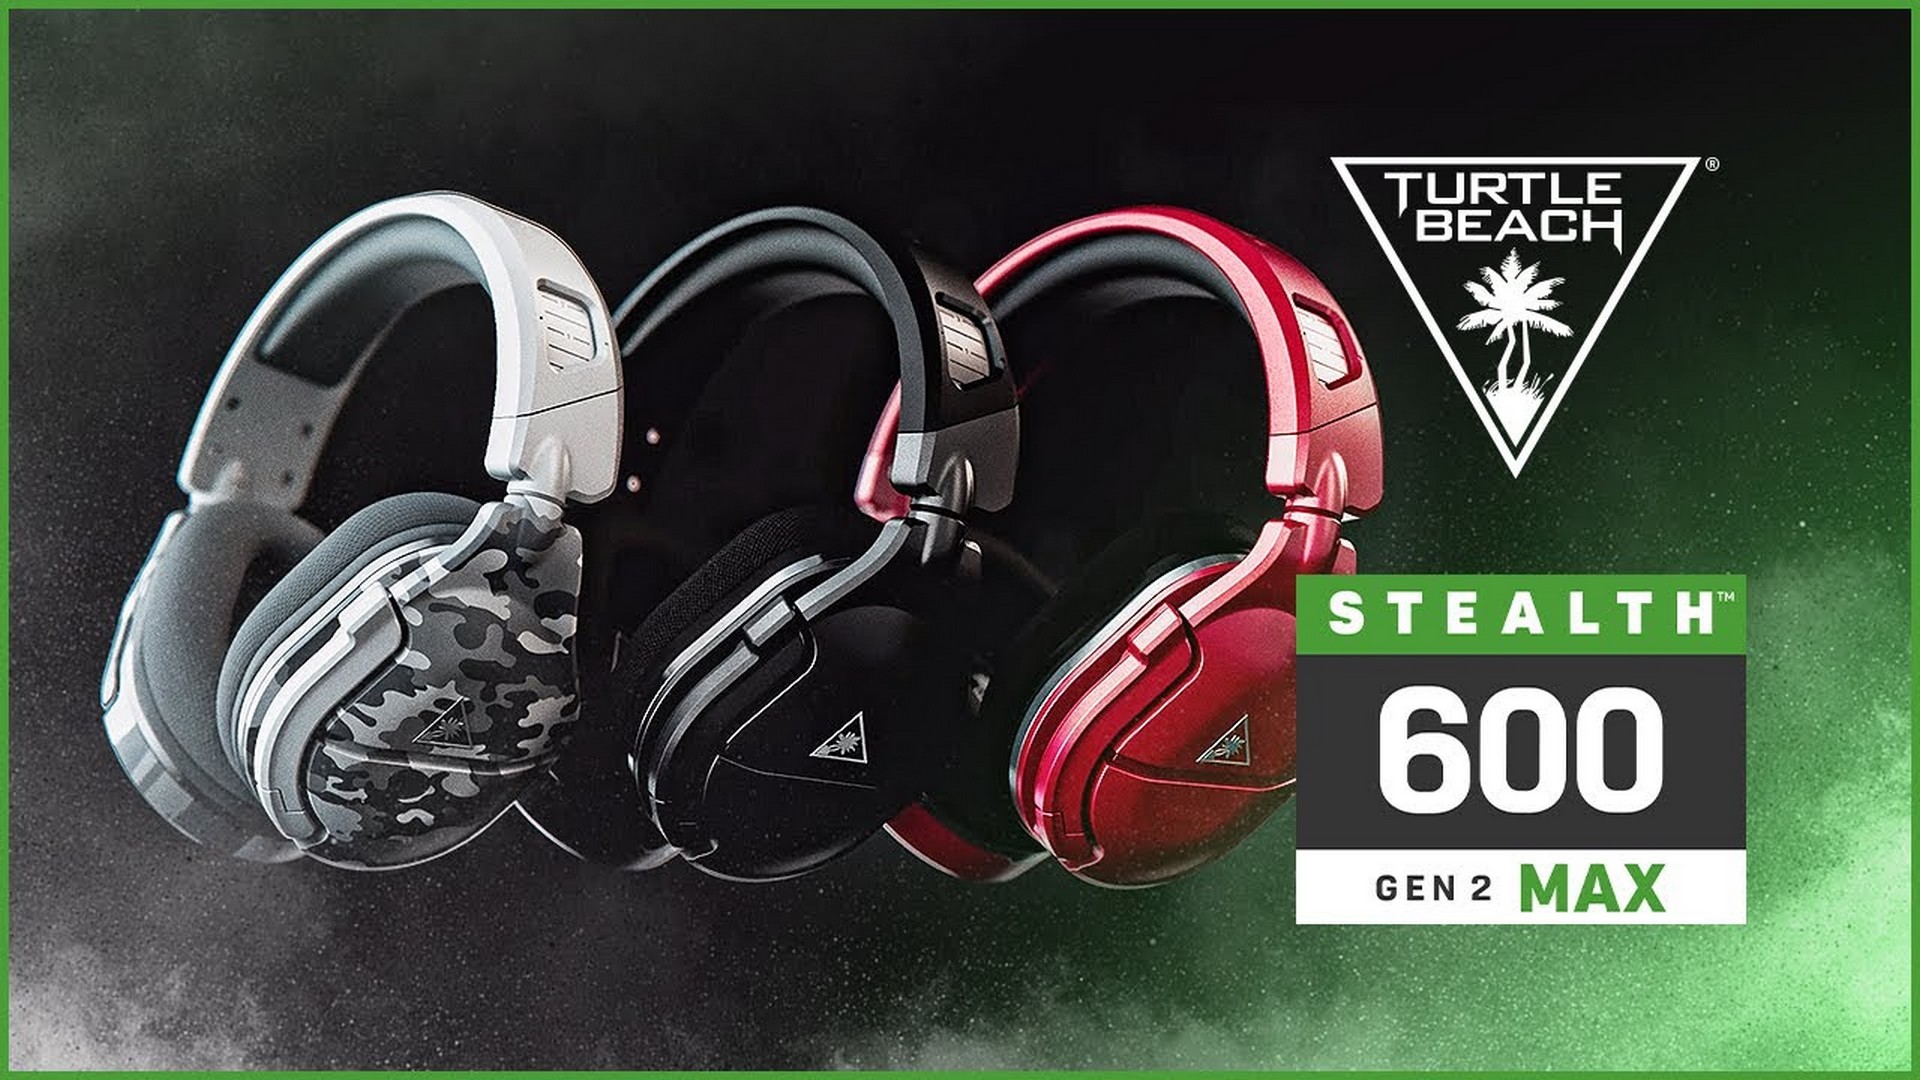 Turtle Beach’s Award-Winning Stealth 600 GEN 2 MAX & STEALTH 600 GEN 2 USB Series Wireless Gaming Headsets For Playstation Are Now Available In Australia